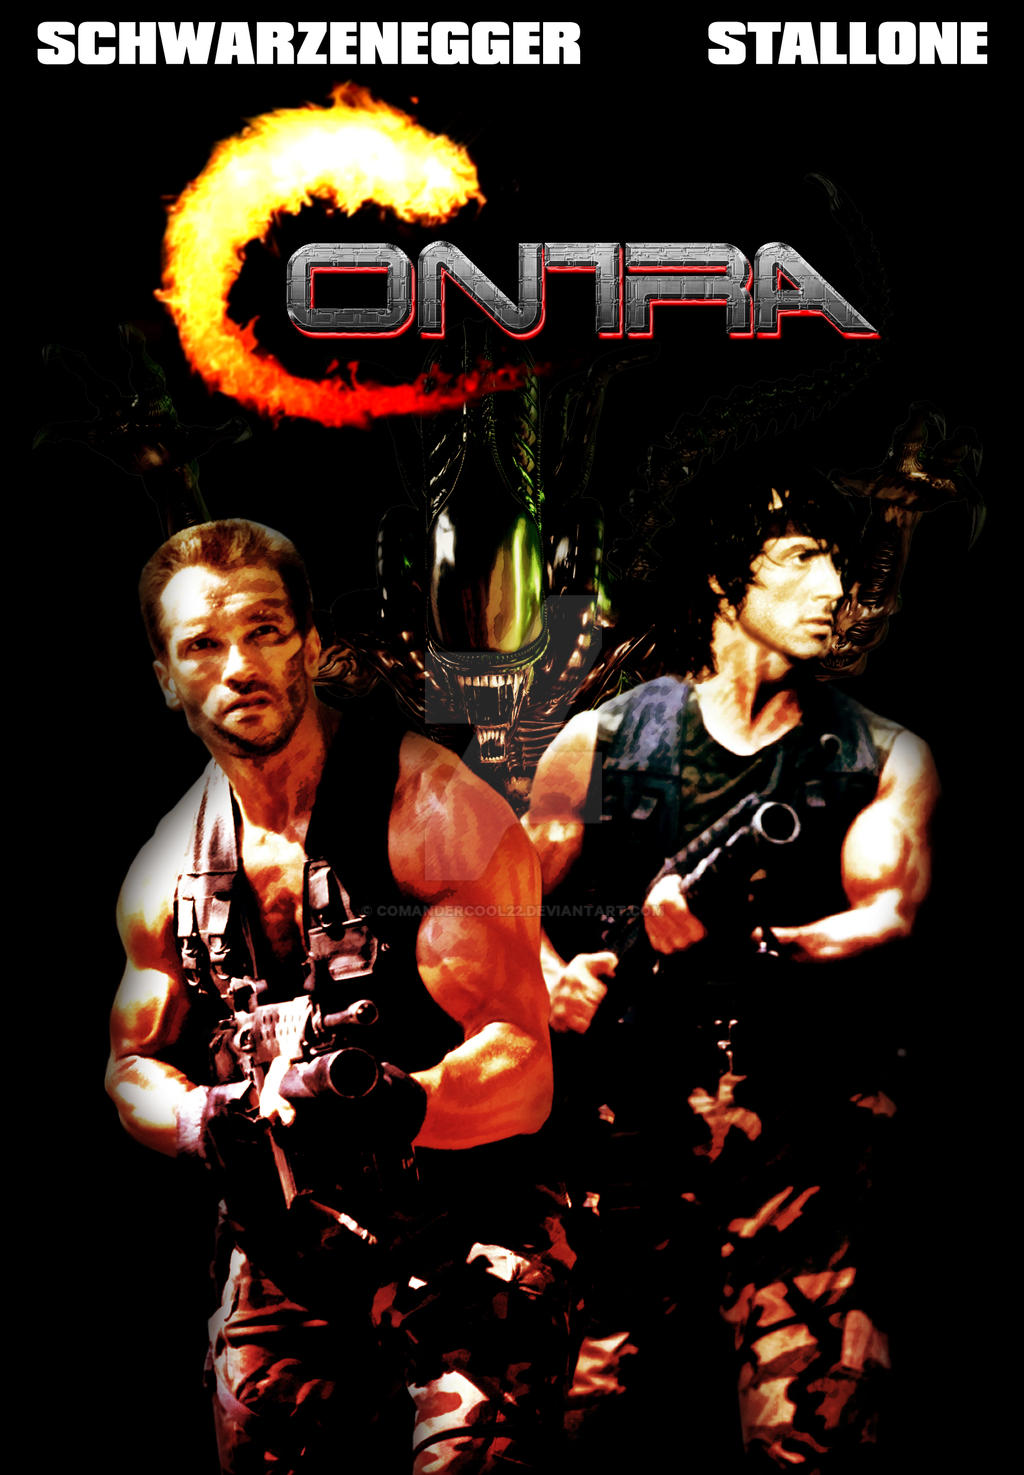 contra__1988__by_comandercool22_d7cpxgn-fullview.jpg